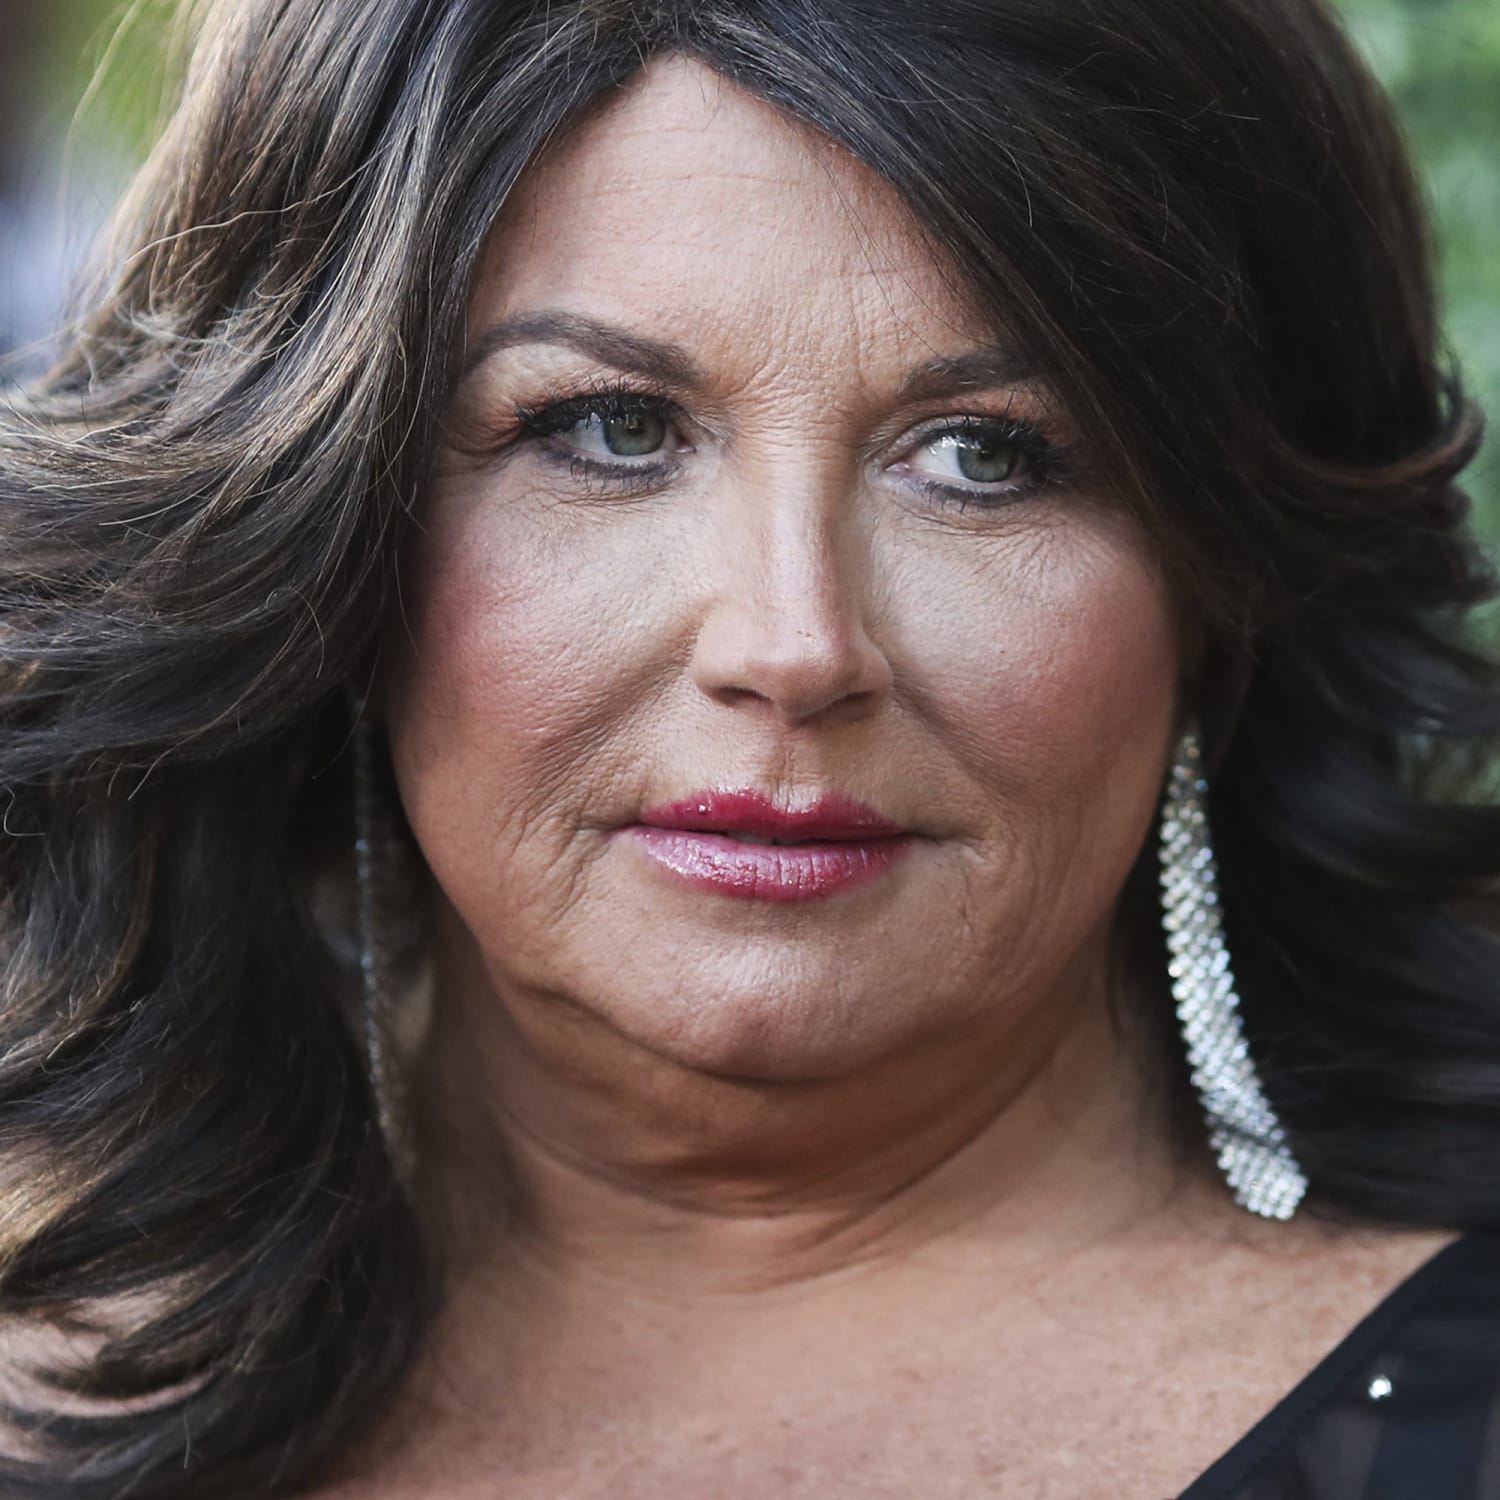 Lifetime cancels plans to air Abby Lee Miller reality show after racism  accusations